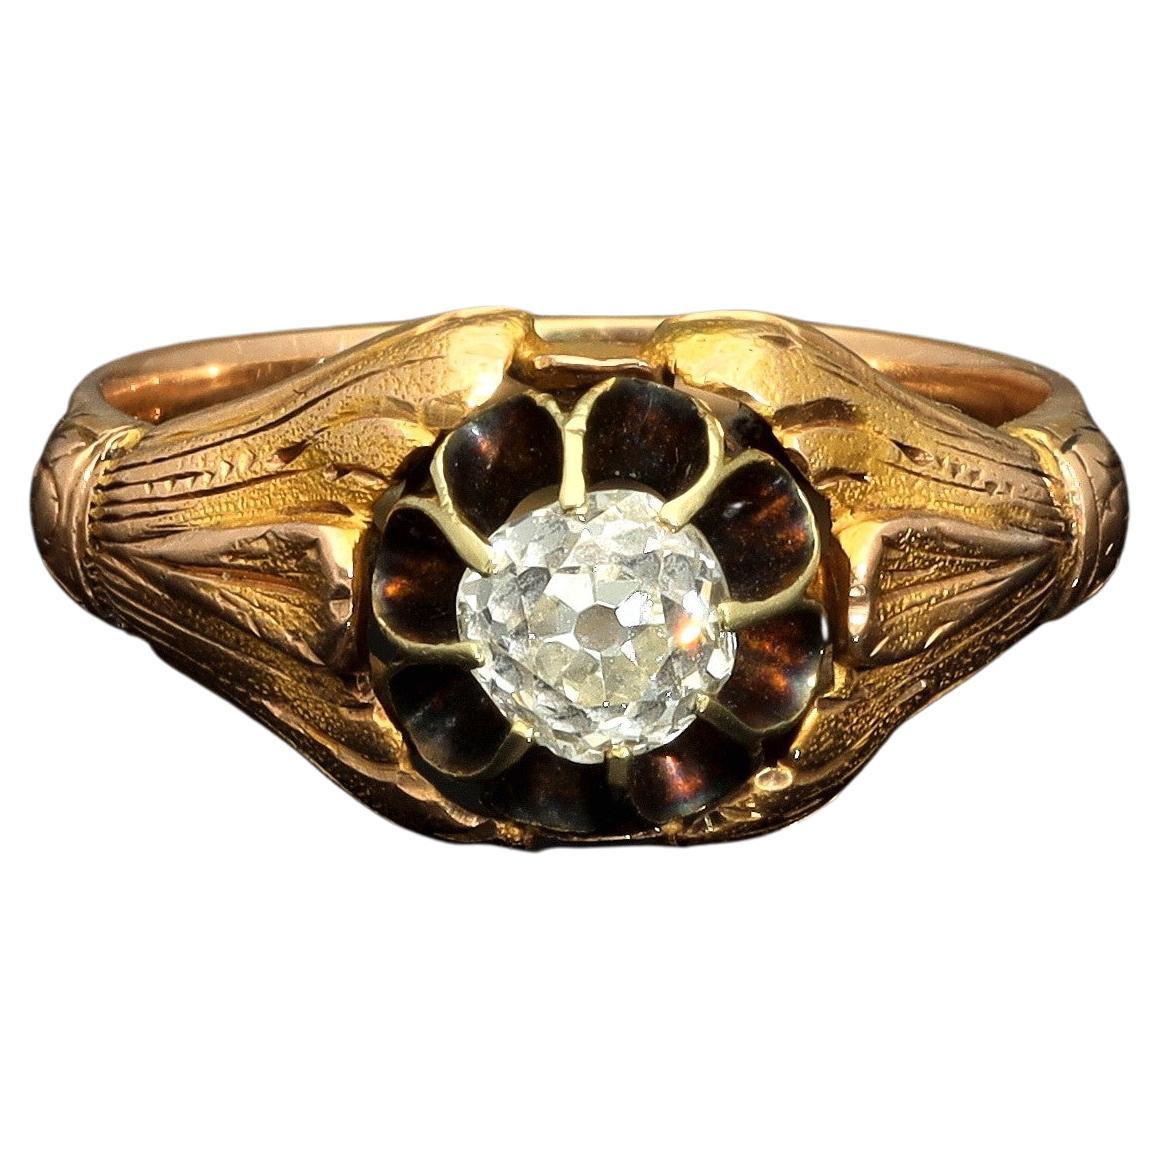 The Virginia Carved Colombian Horse Motif Ring